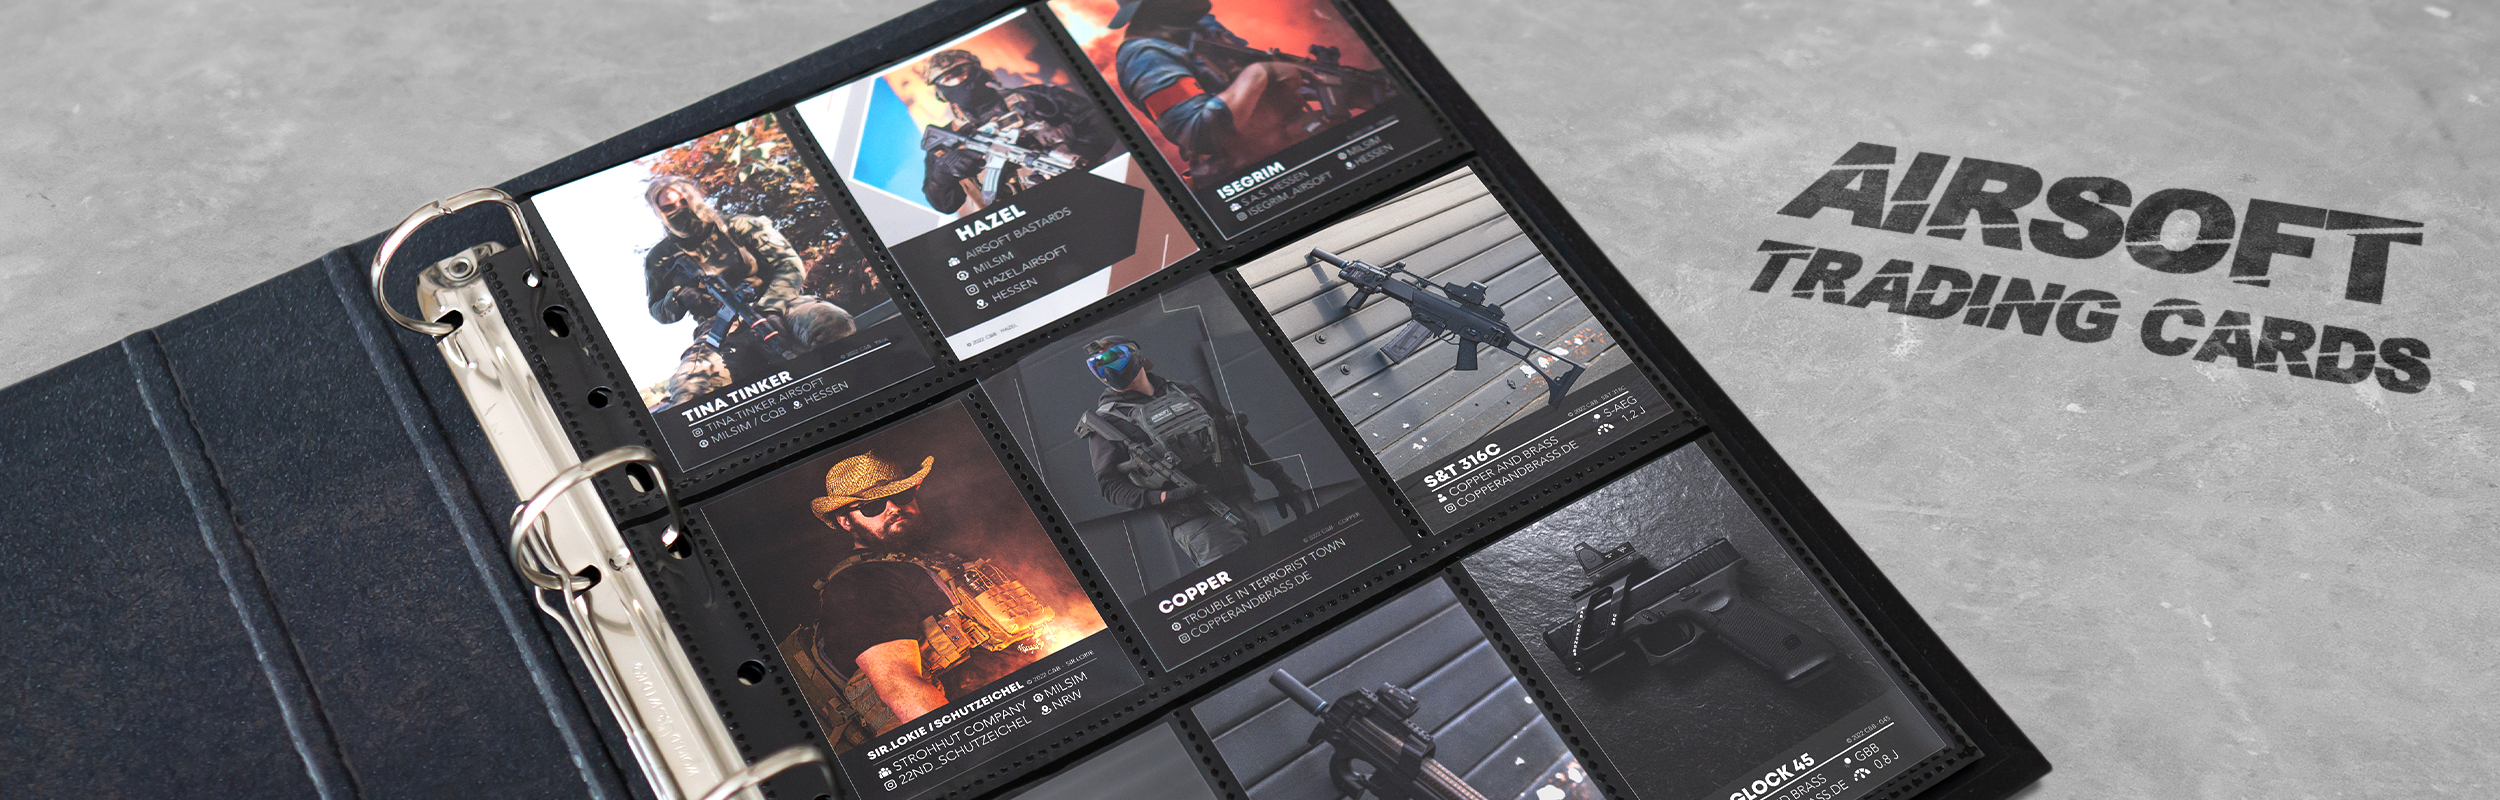 Copper-and-Brass-Airsoft-Trading-Cards